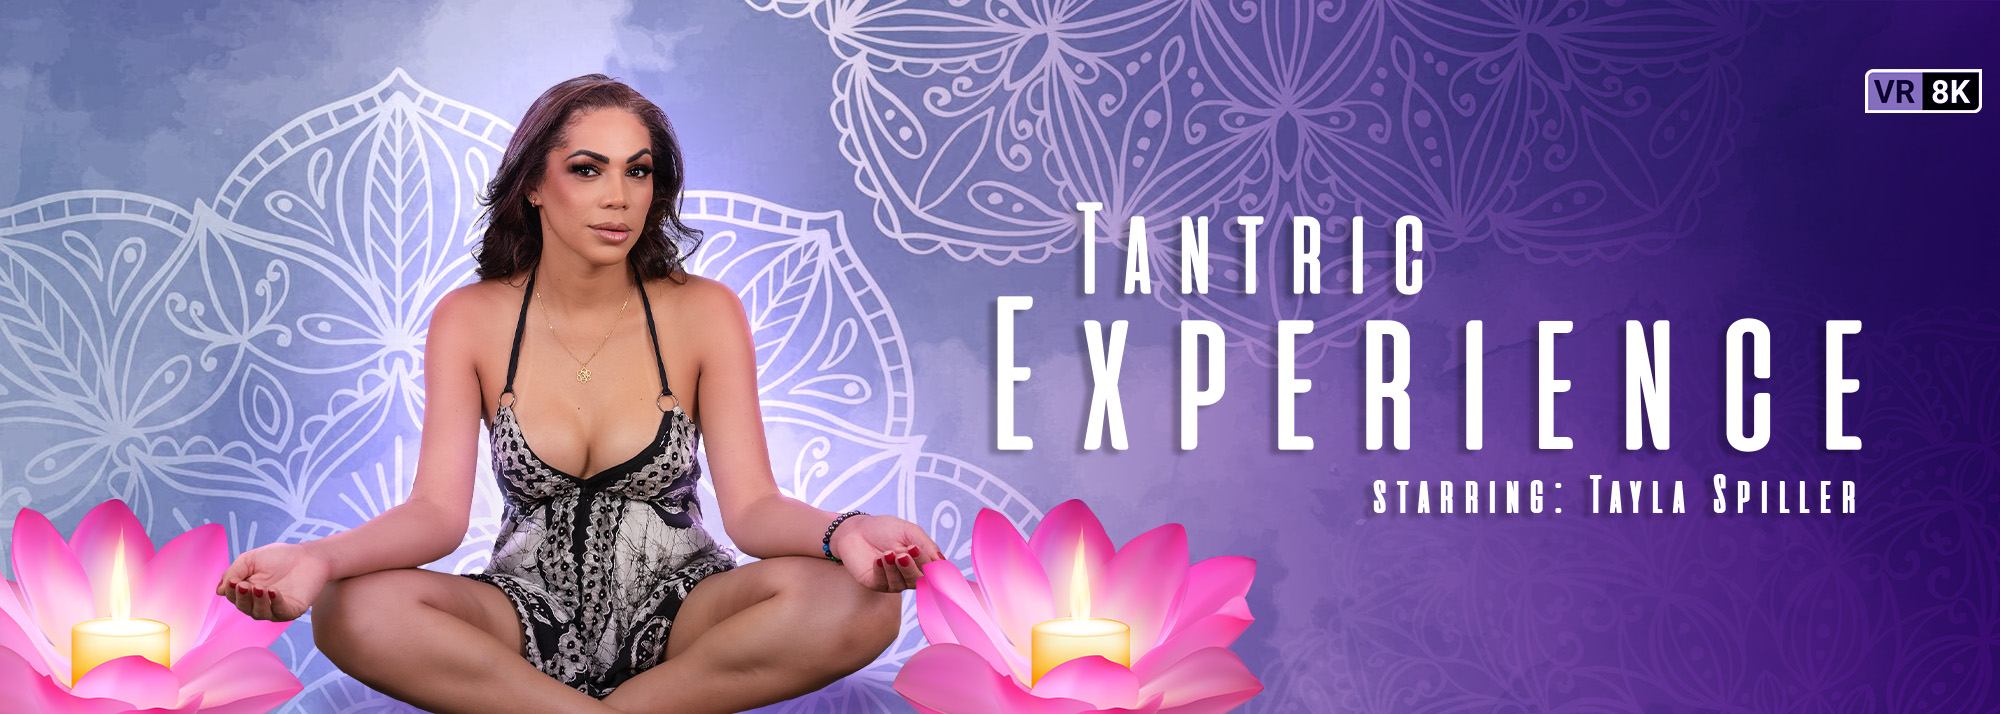 Tantric Experience - Trans VR Porn Video, Starring: Tayla Spiller